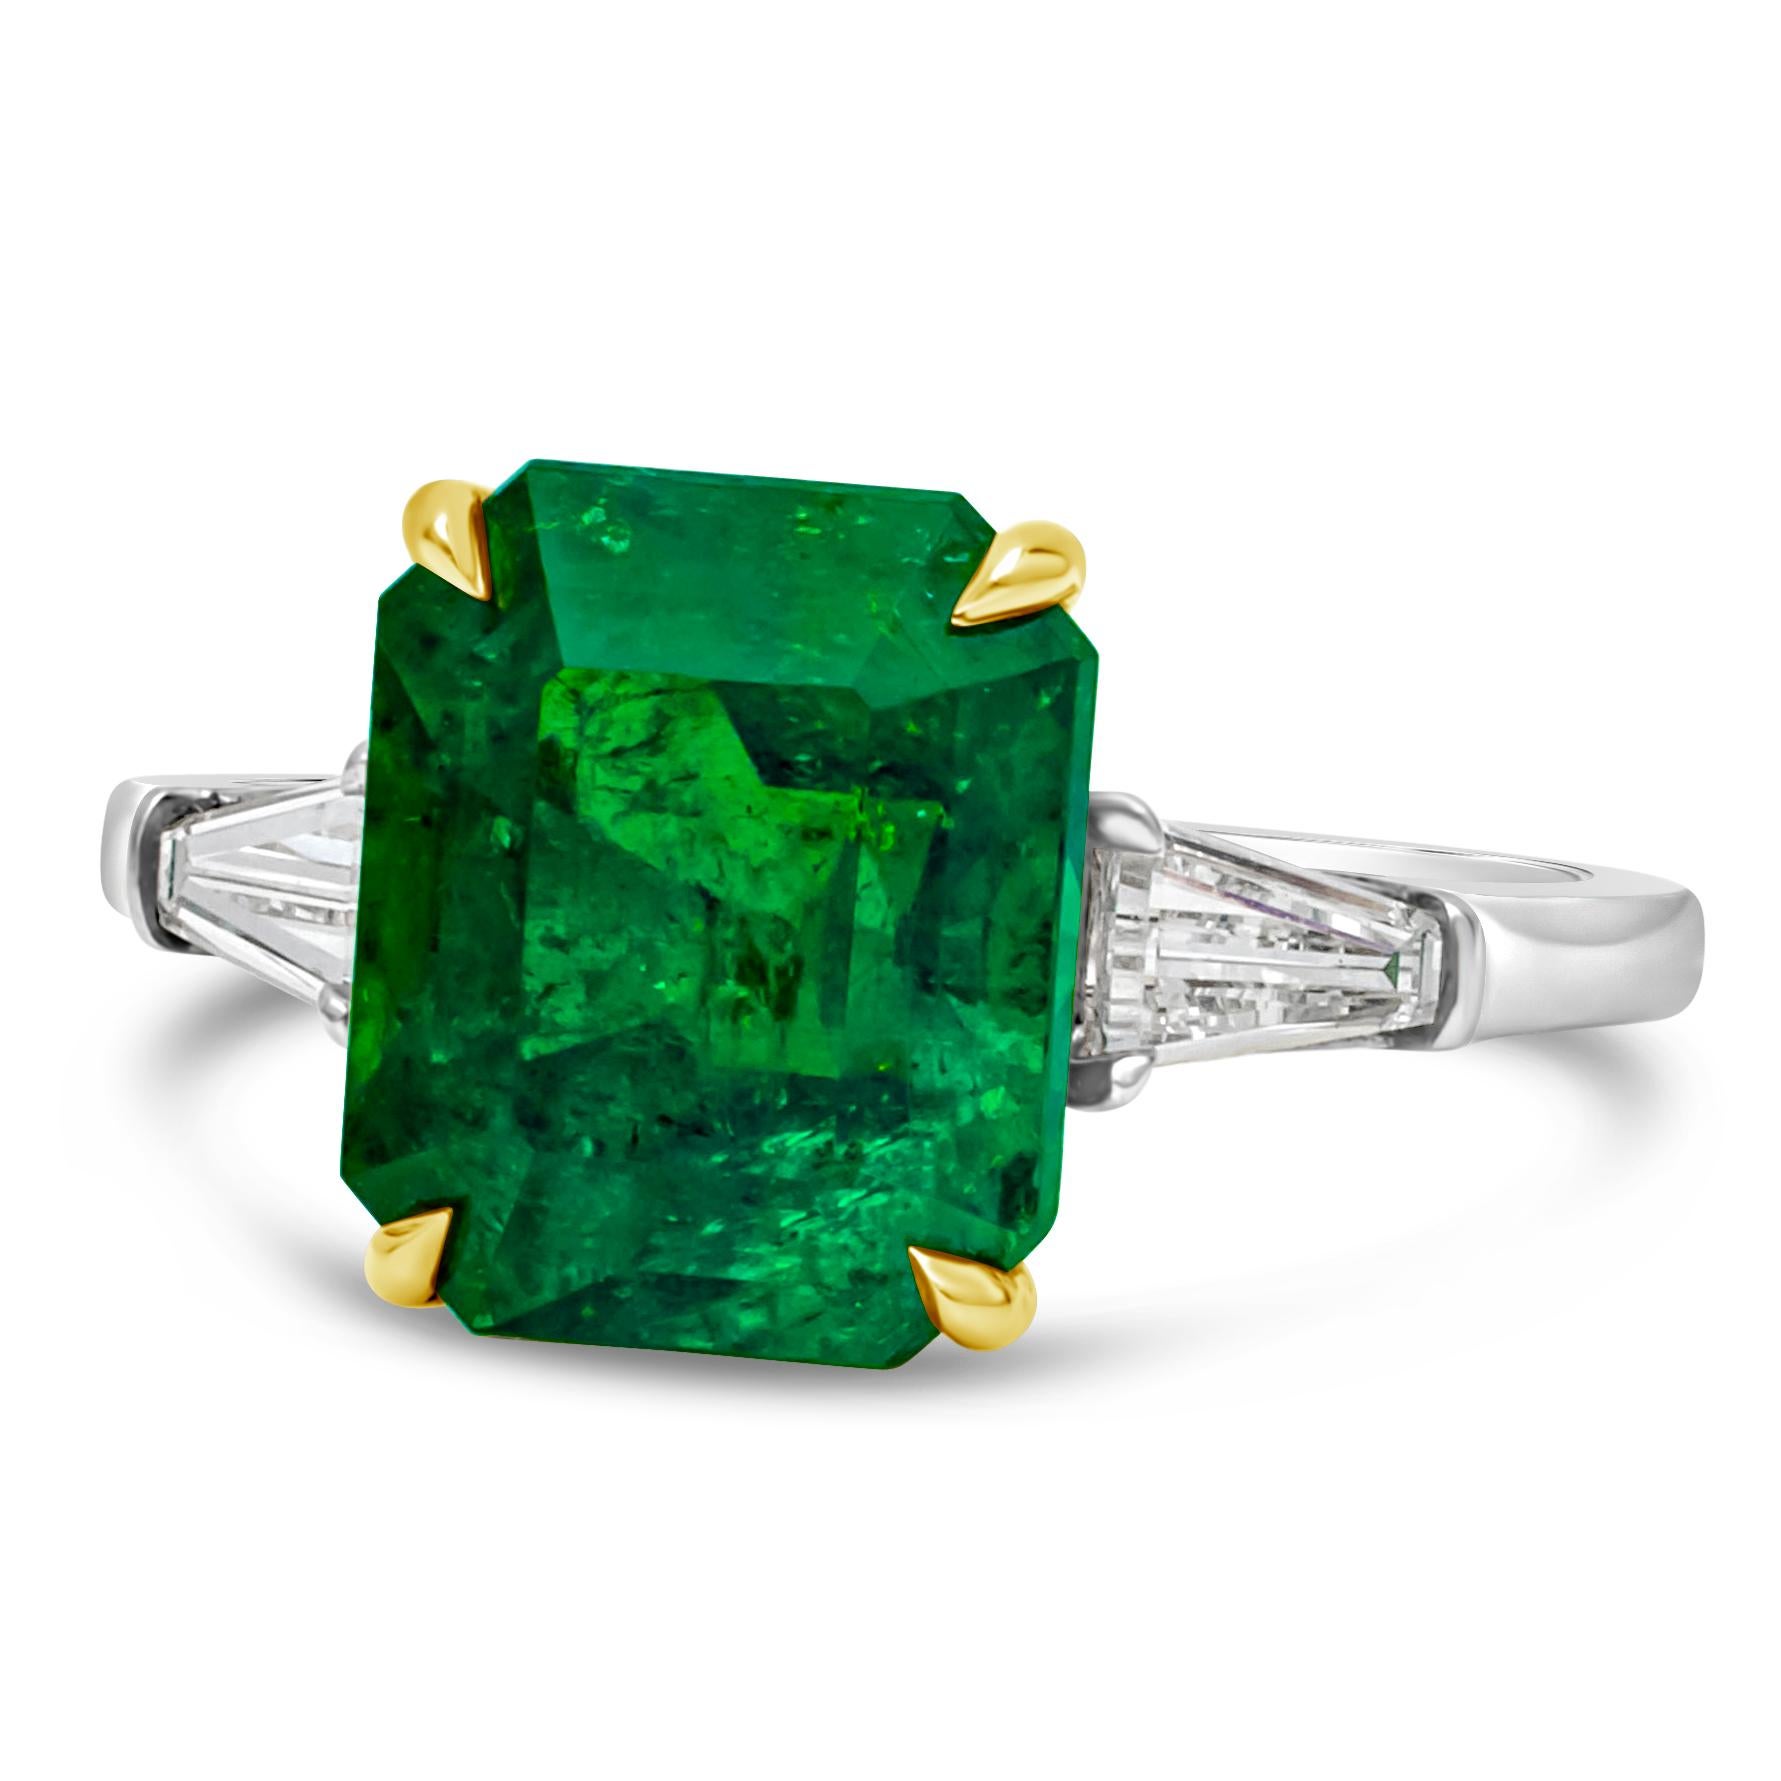 A beautiful and elegant engagement ring, showcasing a color-rich emerald cut green emerald weighing 3.84 carats. Flanked by two baguette cut diamonds weighing 0.40 carats total and set on a polished 18K yellow gold and platinum. Size 6 US, resizable